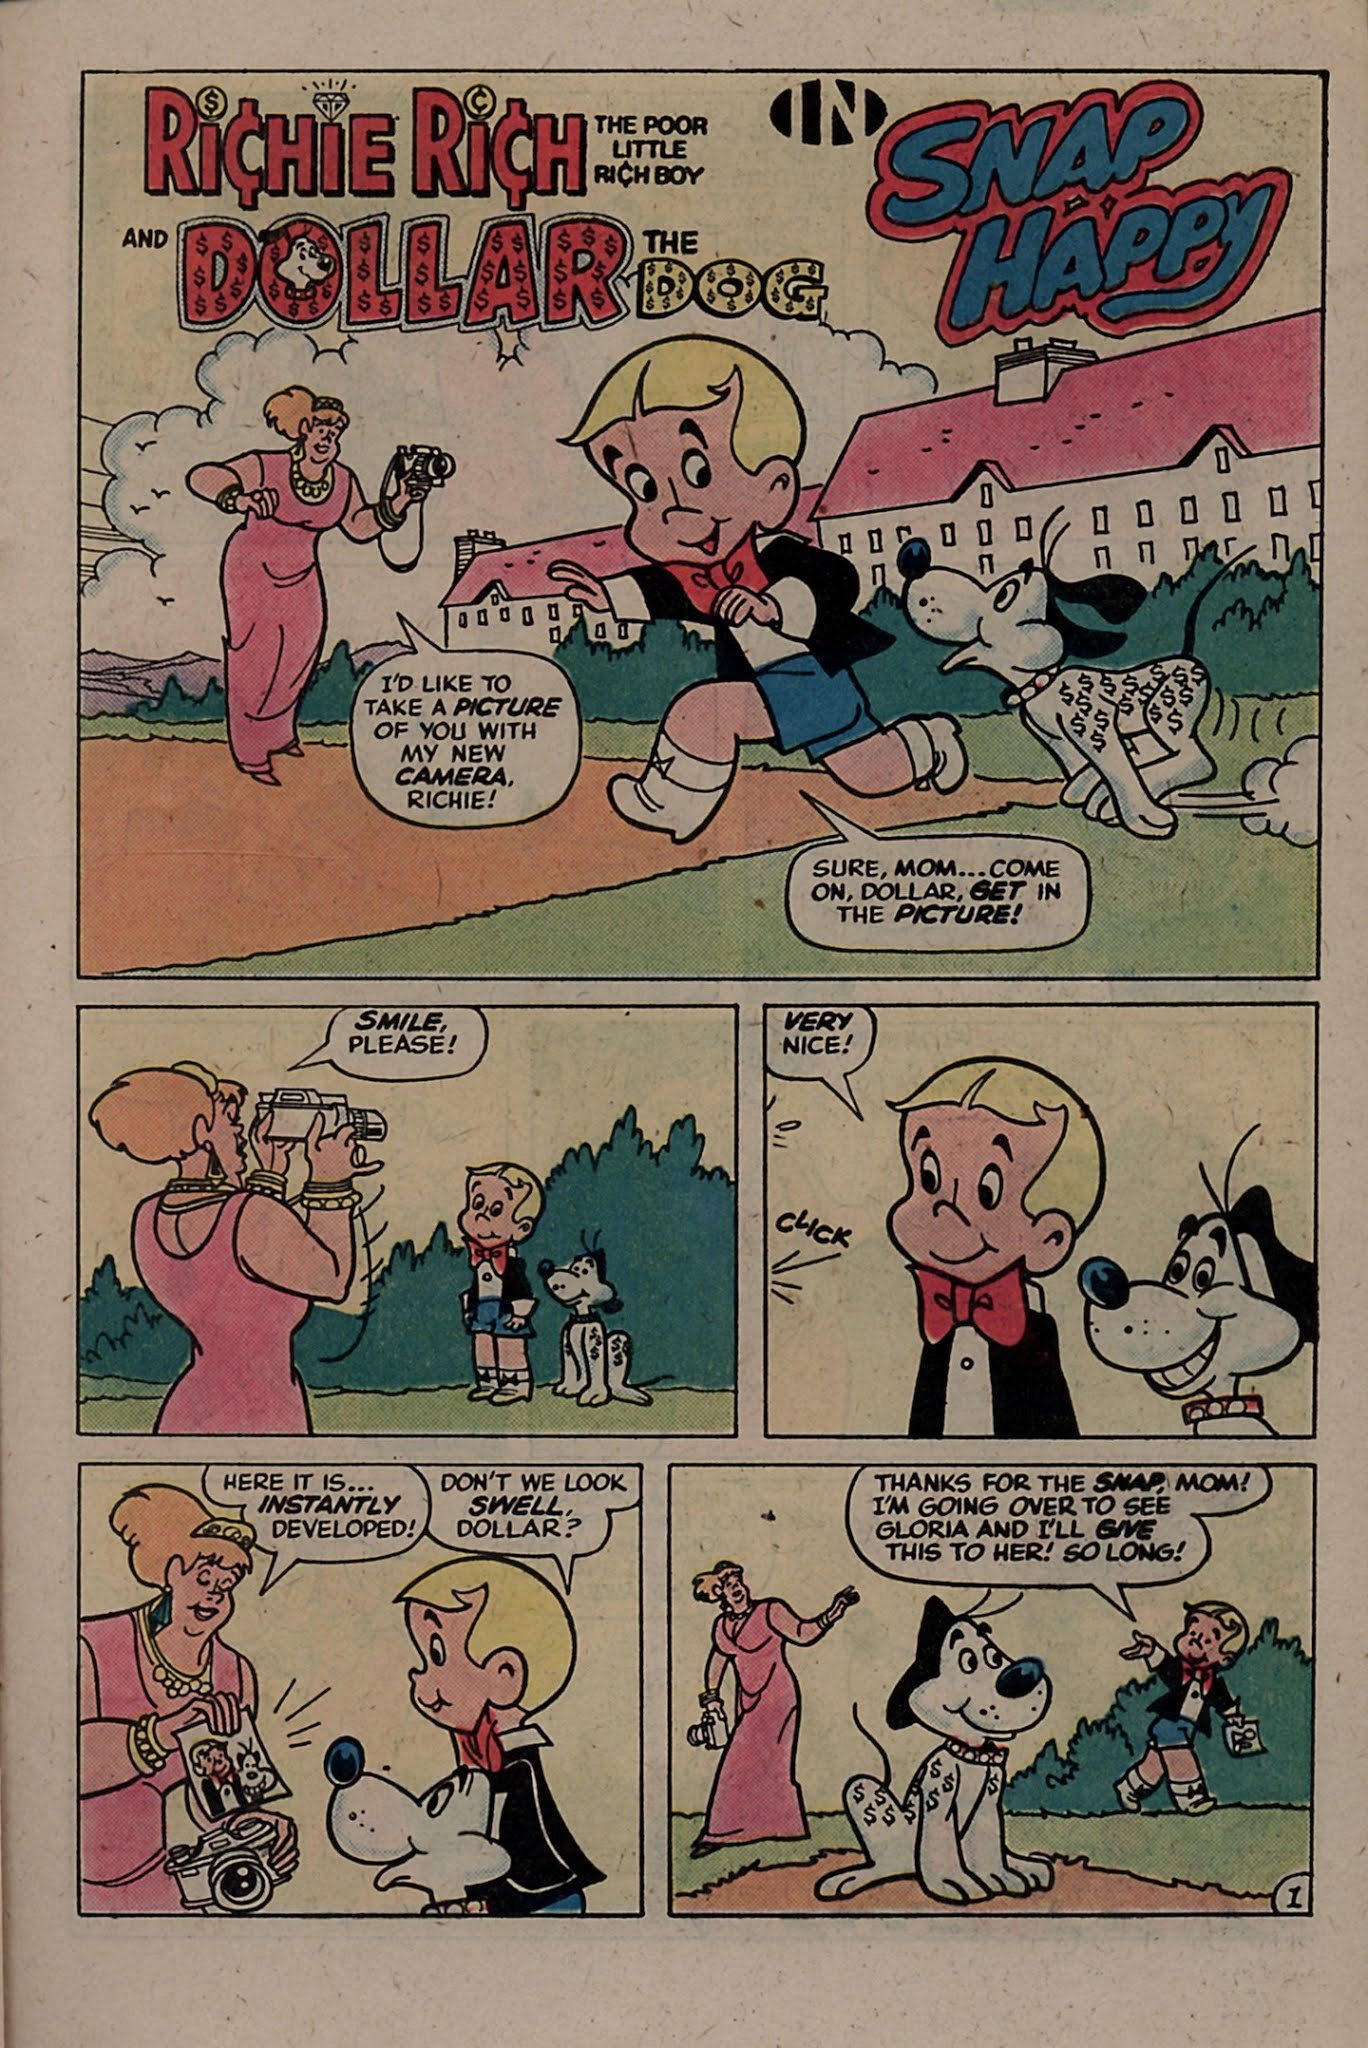 Read online Richie Rich & Dollar the Dog comic -  Issue #17 - 21